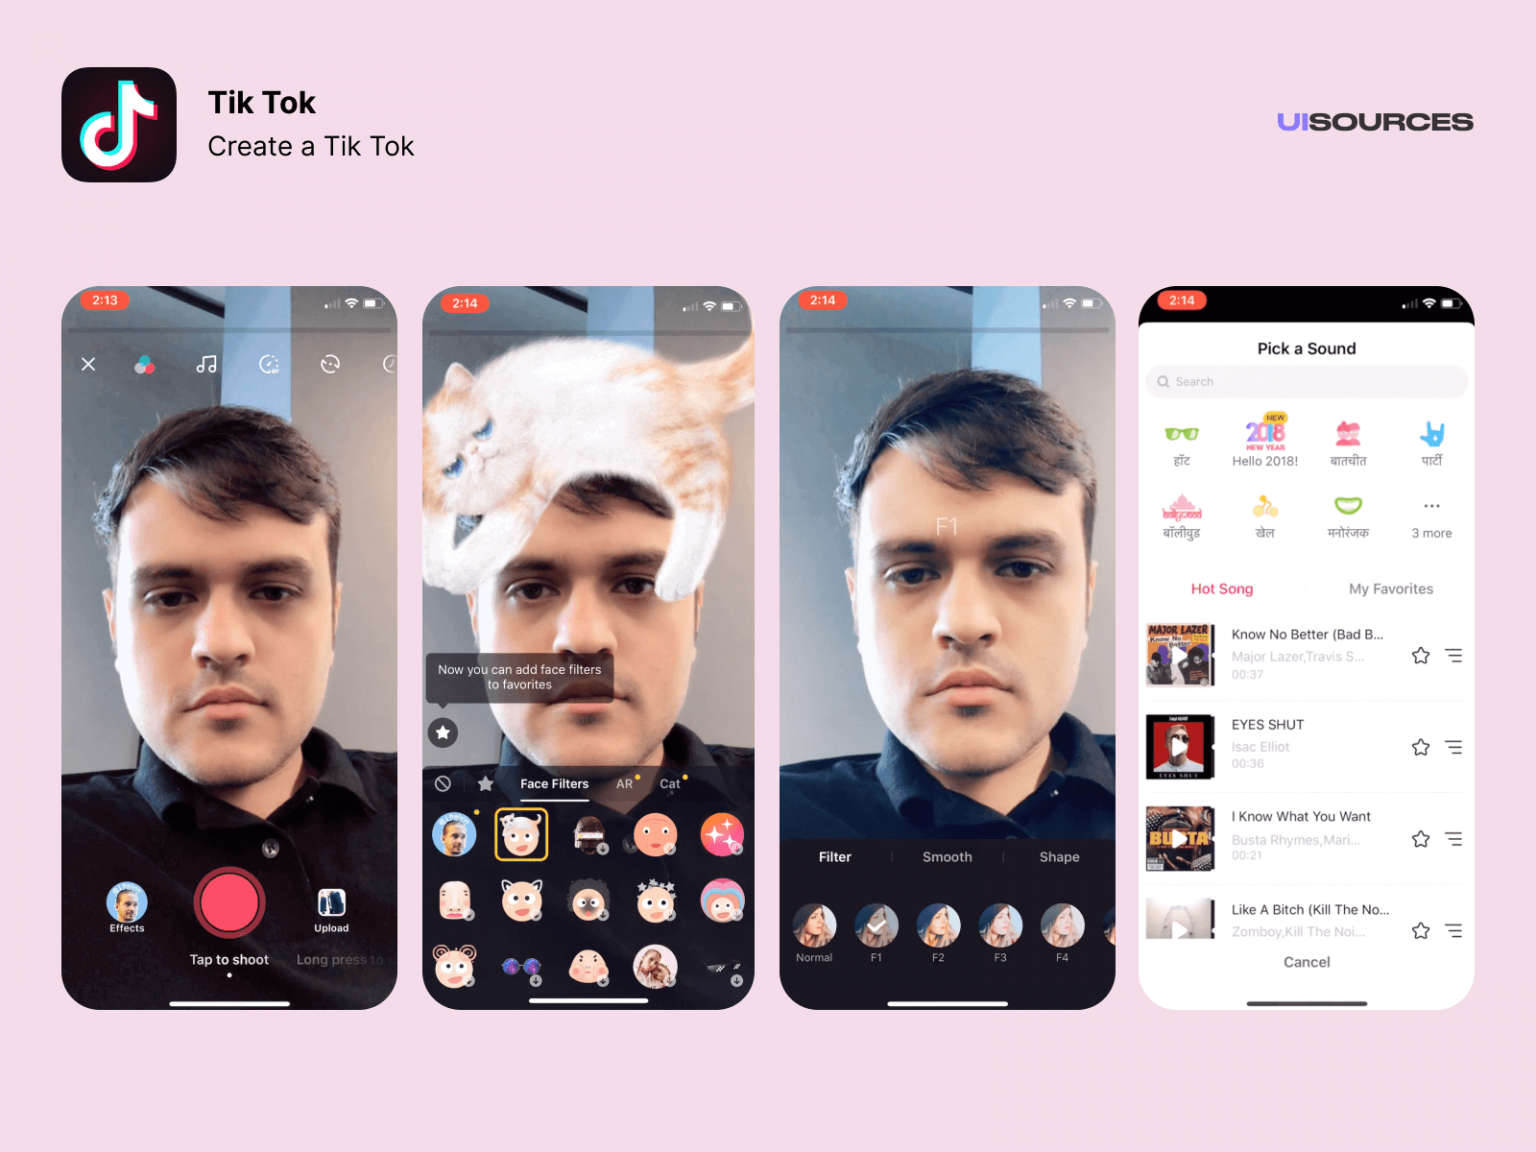 Turn your TikTok into an empire in 2020